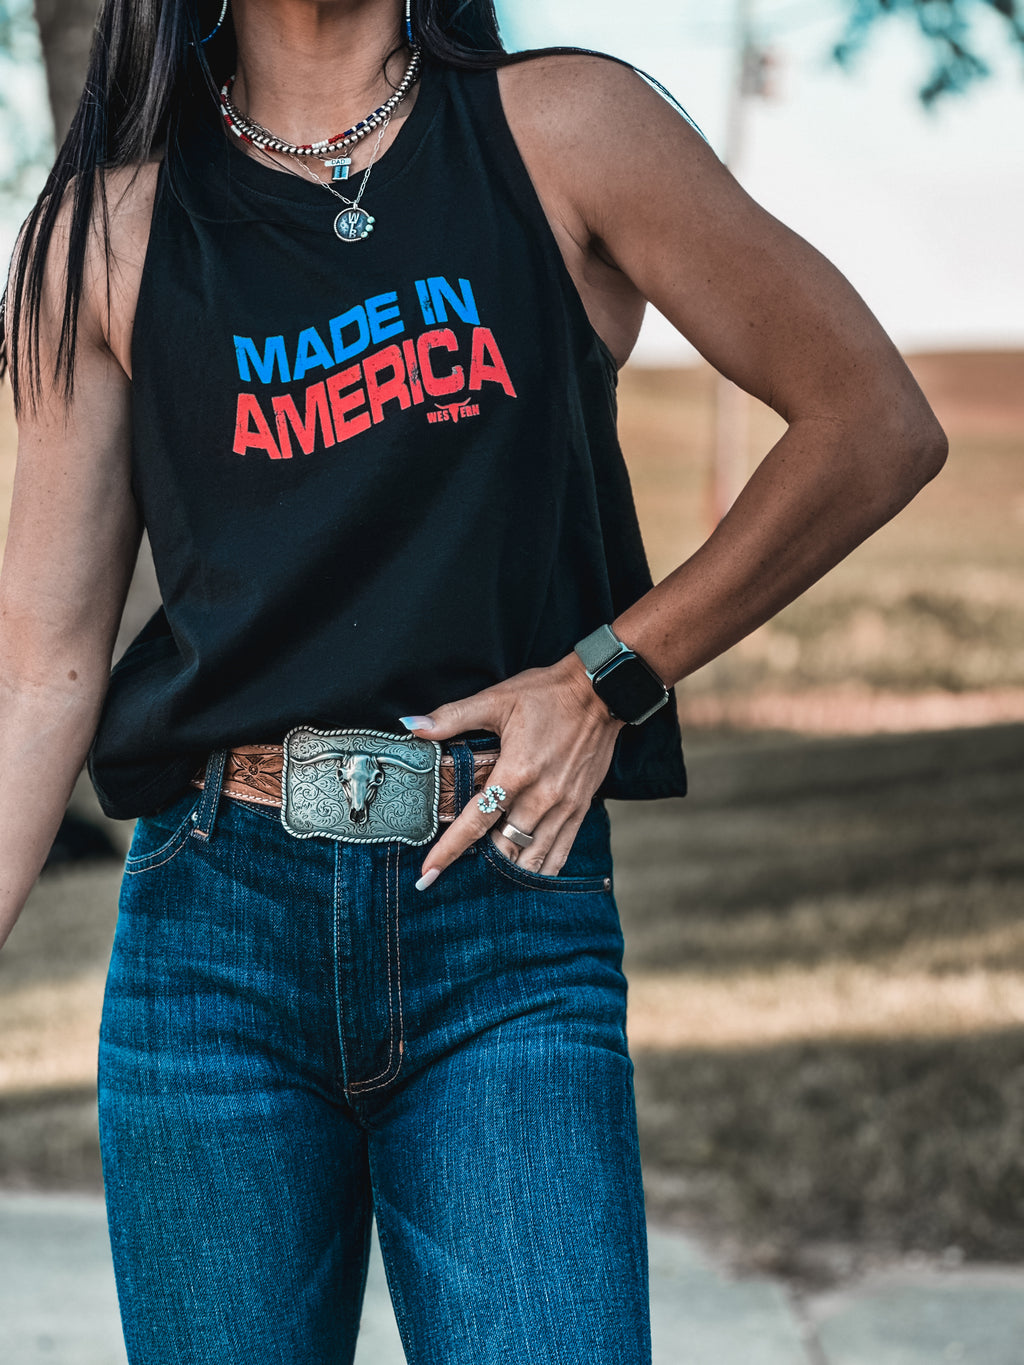 Made in America Cropped Tank - Black